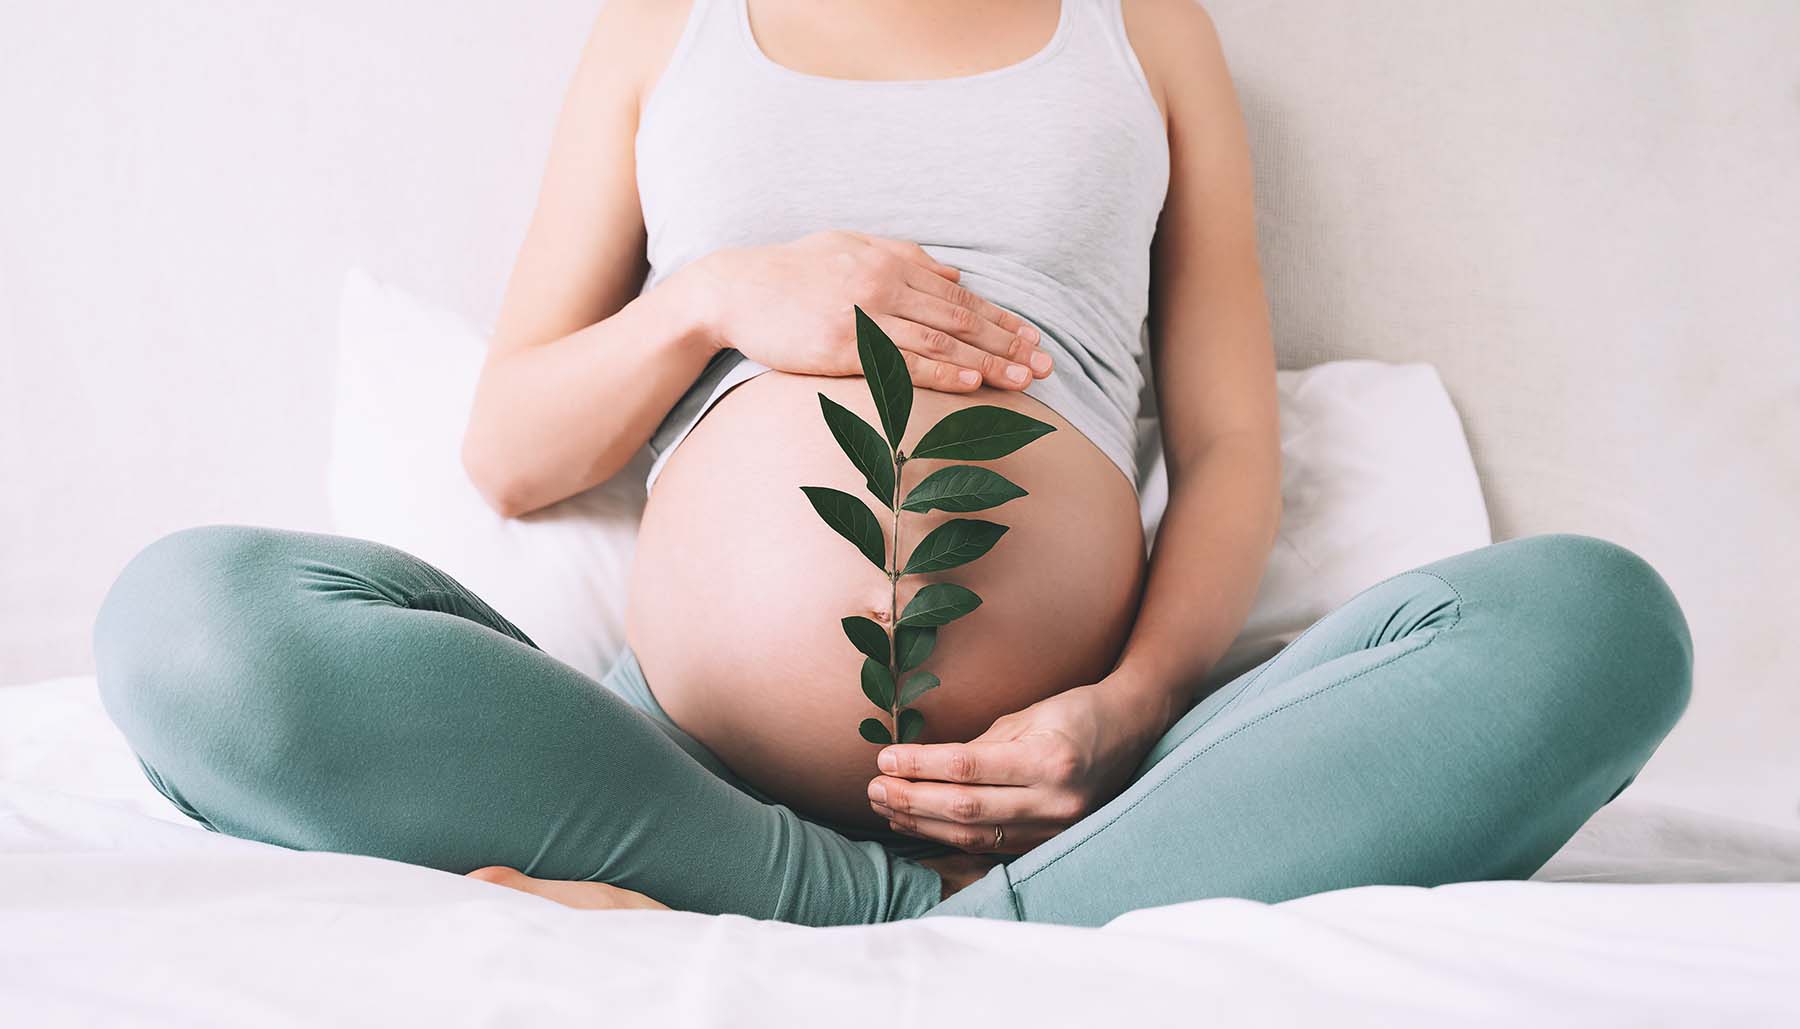 Pregnant woman holds green sprout plant near her belly as symbol of new life, wellbeing, fertility,